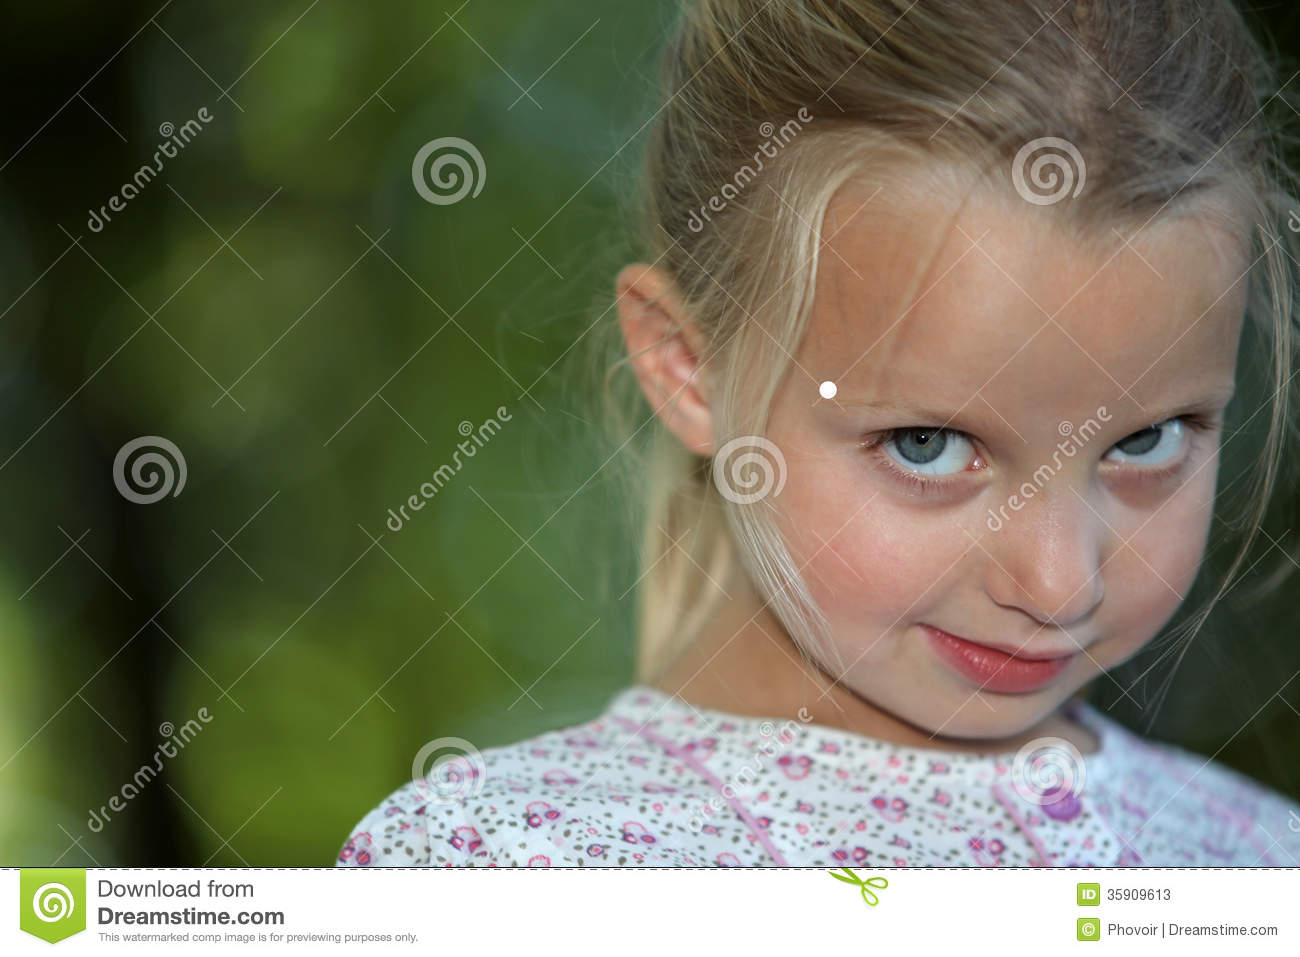 Little Girl Looking Shy Stock Photos   Image  35909613